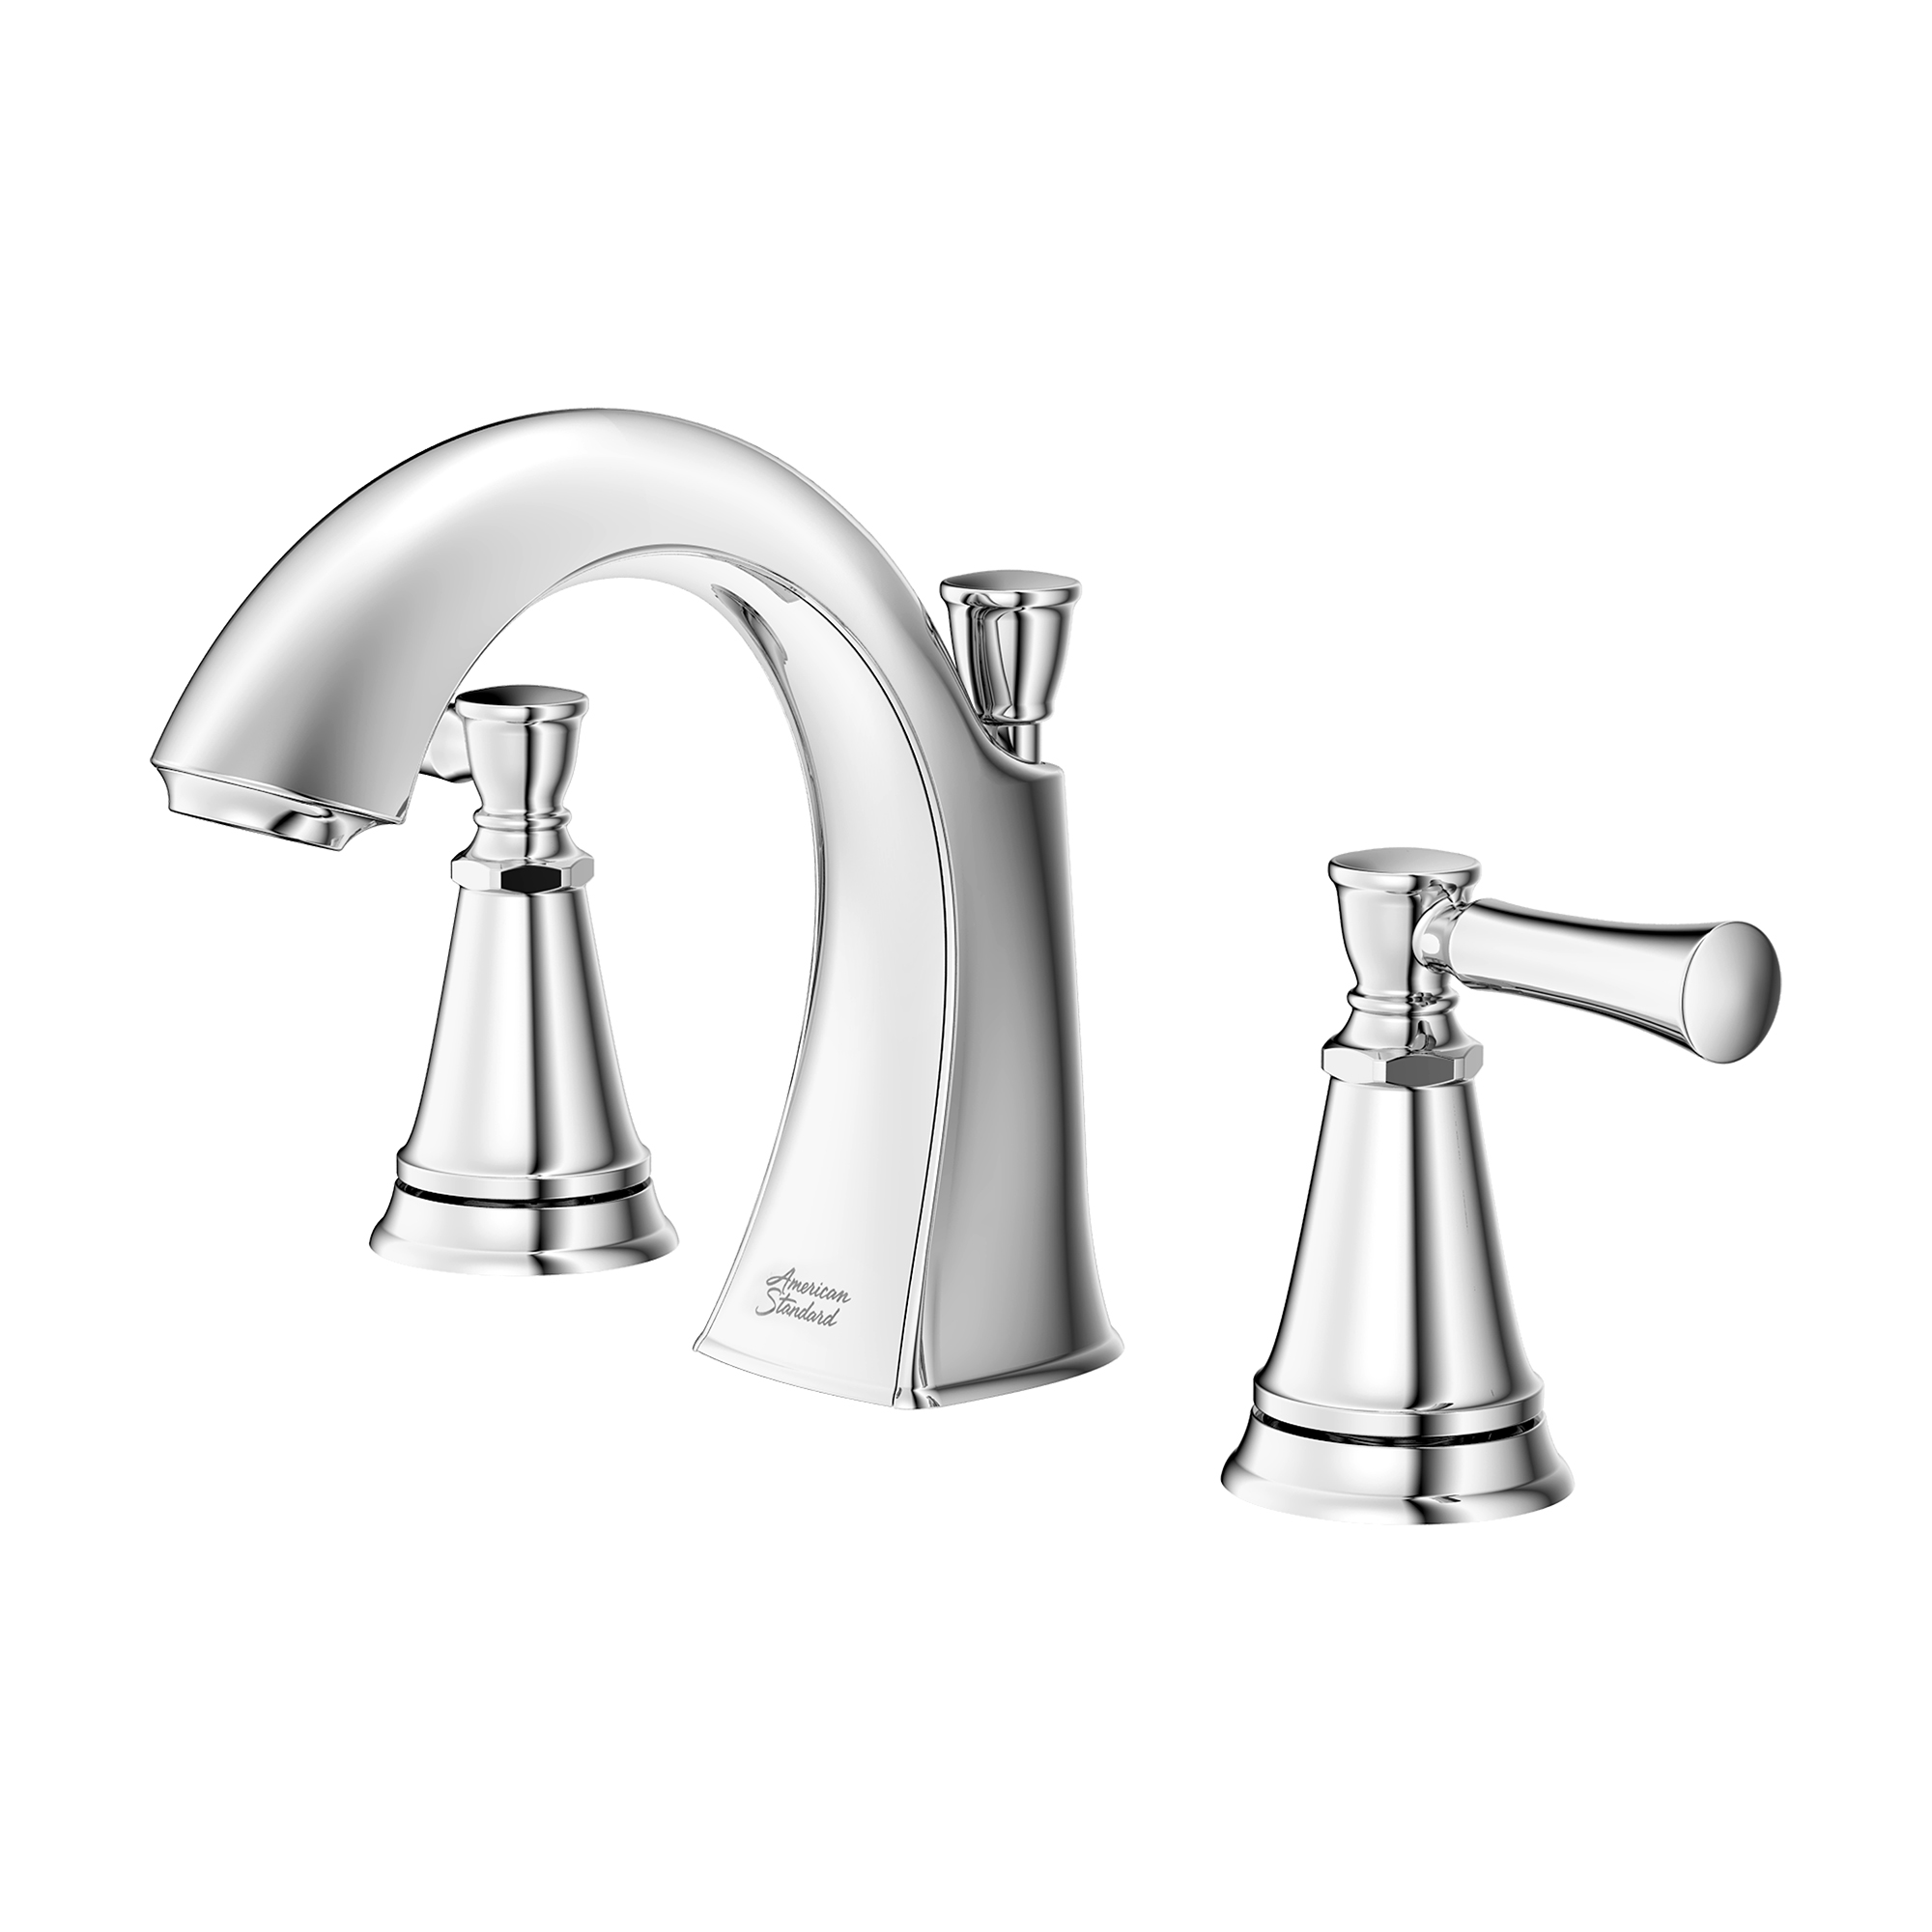 Chancellor® 8-Inch Widespread 2-Handle Bathroom Faucet 1.2 gpm/4.5 L/min With Lever Handles